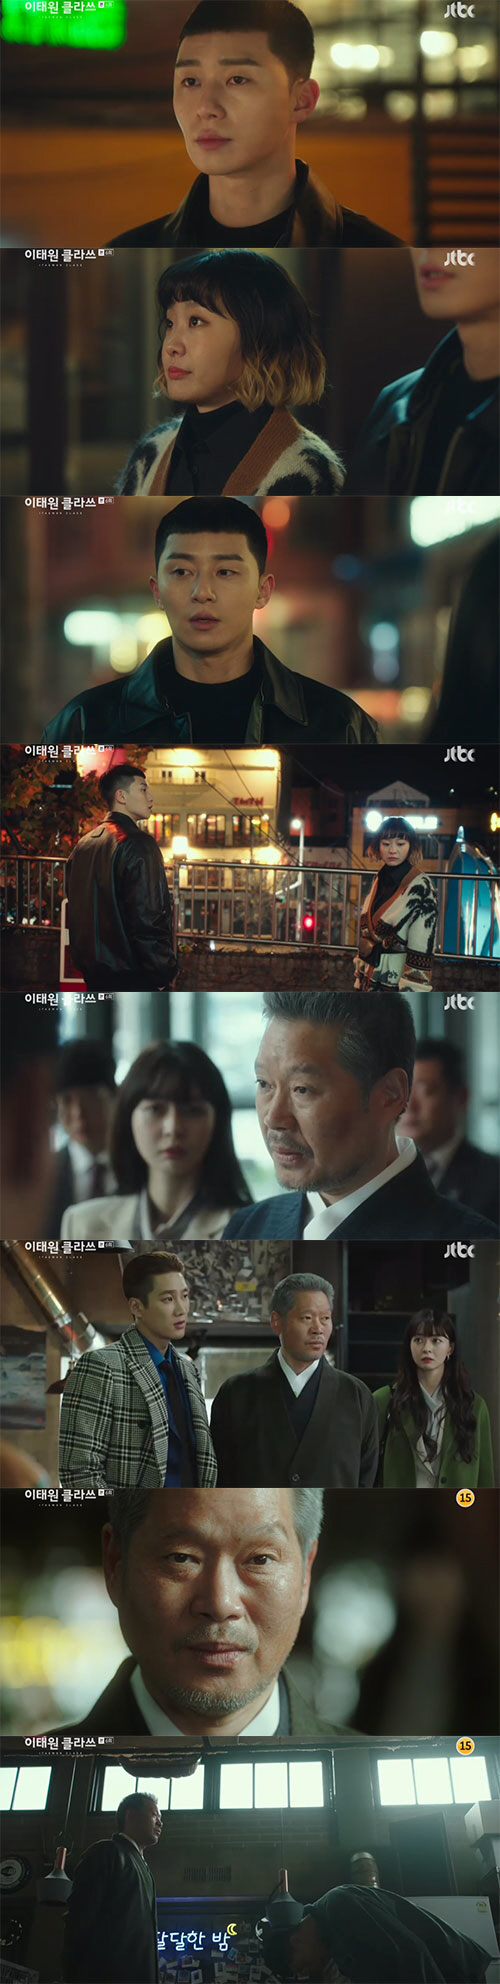 Park Seo-joon hits back at Yoo Jae-myung with sharesOn JTBCs gilt drama Itaewon Klath, which aired on the 15th, Park Seo-joon started counterattacking Jang Dae-hee with a long-awaited stock.On this day, Roy told Oh Soo-ah, Why are you so hard, I do not know what you do.You did your best in your life, you are not wrong, and Oh Soo-ah approached to kiss Roy, telling me You are too shiny to me .At this time, Joy (Kim Dae-mi) approached the two and blocked Oh Soo-ahs mouth.Park said, Joy, what are you doing? And Joy was angry, Do you agree to kiss the boss?I will burn Taxi, said Park, I will send you a ride. Joyce said, Where is the house? I will call Taxi.Oh Soo-ah asked Roy, Can I join you at your party? And Oh Soo-ah eventually attended the dinner at night.Oh Soo-ah said, I do not know if I can join it, and Joy said, I was so excited.Joy, who runs the blog, said, This is a four-star store, and Park asked, How many stars are our nights?Our store is three stars, said Joy.Oh Soo-ah also asked, So there are five stars in Itaewon, and Joy said, There is. Foa. Its both good service and taste.Park said, We will be five stars, my goal is a franchise, and Oh Soo-ah, who was early, looked surprised.Joy, who met again in the bathroom, asked Oh Soo-ah, Why did you do that? You said Sister did not do it. Oh Soo-ah said, What do you care?I do not like the new Roy. I love it like hell, said Joy.I had a mental examination in junior high school because I was twisted, and I had a 95% sociopath tendency. Oh Soo-ah said, So what you want to say is that you are a crazy bitch. Joy said: What I want to have is someone who has unconditionally, Ill talk to you again for Sister.I like the boss, and Oh Soo-ah said, But what the new Roy likes me. After seeing a family photo in the office of Jang Dae-hee, Oh Soo-ah asked, Is it because of Roy, who left his second son there? Jang Dae-hee was embarrassed to learn that his son was working there.Jang Dae-hee asked, Are you saying that you work there? And asked whether Roys shop was doing well and why it was good.Oh Soo-ah said, The reason why the night is good is because of a child named Joy. Jang Dae-hee asked, Is it quick to see and fast to judge the situation?Jang asked Oh Soo-ah, How about the Roy you judge? and Oh Soo-ah said, It seems reckless, solid. If you set a goal, you see it and go on.So the evaluation of the employees is good, he said.Oh Soo-ah said, The goal of Roy is to think of a franchise called Night, and Jang Dae-hee said, O chief keeps watching.At this time, Chairman Jang Dae-hees secretary came out of the car and heard this story, and secretly told Kang Min-jung (Kim Hye-eun) managing director of the company.Joysers mother, Min Jung (Kim Yeo-jin), knew she hadnt gone to college and shouted, Is it because you have someone you like?Joe Min Jung said, I was born without anything and raised you while listening to crazy bitches.I was glad that you were not so smart that you were not like me.I am not carrying my dreams. It is my life. It is Joy. It will not take so long.I was better than I looked, he said, taking the baggage his mother had packed.Joy, who came out with his luggage, was alone on the overpass, and when he was jogging, he saw Joy and asked, Whats going on?Joy said, I rang my mother, and Roy said, I heard from a nearsighted person who did not go to college. Joy asked again, Why did not you stop me?I need you. If you need a good company that your mother thinks you need, you will be a company like that. Is it selfish?Its more comforting than any word, but its surprising, seeing such a brazen sound come out, said Joy.If you want to be a franchise, youre going to be the best in the food industry. Well make that promise together, Joy promised.The busy night began to draw part-time jobs, and at this time, Seo Eun-soo appeared.Park said, I was a person who worked in a Seokcheon Lee store. Seo Eun-soo asked, Please pick my brother, but Joy said, I feel bad.Since then, foreigner Kim Tony (Chris Ryan) has appeared as a part-time student, and Joy has hired Kim Tony, saying, Its a taewon, but its okay to have one person who knows how to speak a foreign language.Joy also called the station PD and said, We got the broadcast. We decided to go out Miniforce.At this time, Roy was walking on the road with Joy, and Oh Soo-ah congratulated him on good when he heard that he was on the air.Oh Soo-ah told Park Roy, I was picked up at the party that day, and Ive been a little bit dejected since then, Ive lived as a long-term person, and Ill live as a long-term person in the future.Dont like me anymore, he said.The Fountainhead, who watched this, told Jang Dae-hee, I care about Roy, and I will handle it. Jang Dae-hee said, I have been going for 10 years.Such a guy is no threat to us, he said.Jang Dae-hee said, If I bring O-jang to my daughter-in-law, I will not tell you to look at the line anymore. The Fountainhead asked, Why do you care about Roy and Oh Soo-ah?Jang Dae-hee said, Roy is a measure to know if Oh Soo-ah is our person.Jean The Fountainhead met with Park Roy, who came to the MinorceFoa program, and told PD, Is not it too sudden if such a hole shop appears? Nolan PD said, Did you two build any enemies?We are our enemies, Park said.The Fountainhead told Park Roy, You know I like Oh Soo-ah.I was not thinking about marriage because of my birth, but my father said it was good. Park said, I am anxious, I am only a middle school graduate. The Fountainhead said, My father said, I have been in the store for 10 years, but you are just a measure.I have to understand the topic and live. SuA is hard at the company because of you. The Fountainhead called Oh Soo-ah and said, My broadcast is... theres a roy.Dont like him, but Oh Soo-ah hung up.Joy had received a call from the PD and said, The broadcast was canceled, and when he heard the news, he was climbing up to the roof and recalling what Jean and Oh Soo-ah had said.At this time, Joy came up and comforted him, Do not worry about many other programs.Park, who was walking along the road with Joy, met Oh Soo-ah, who left work, and Oh Soo-ah opened his mouth, The broadcasting station thing.So Park said, Do not worry about it, not a broadcasting station.I guess there was a real big deal, not like the boss, Joy asked, and Park said, I dont have much room. Joy said, Do you like it a lot?I know that Sister has reported it, but it seems to be unchanged. Joy said, When I was a kid, I never had a bad luck when I played bad luck. But nowadays I feel like I have a bad luck.That Sister did not report it, and Roy heard this story and ran to Oh Soo-ah.Park Roy ran to Oh Soo-ah and was angry, Why did you lie? And Oh Soo-ah said, The president is aiming for you, and I am a long-term person.At this point, Park held Oh Soo-ahs hand and said, Im sorry, its me whos selfish.I always thought of me, but Oh Soo-ah tried to shake his hand, saying, I told you not to like me. If youre struggling, just hold it up a little bit more, Park says, I dont care what you do to me, I dont care what you do.I will be awesome so that you will not be more difficult. Eventually, Park called Lee Ho-jin (Idawit) and asked, How much do you do if you do all my money? and Lee Ho-jin replied, Its about 1.9 billion if you do all.Park said, I invest all 1.9 billion won in the market.Jang was surprised to hear the name of the shareholder in the name of the shareholder, and went to see the bird at night.